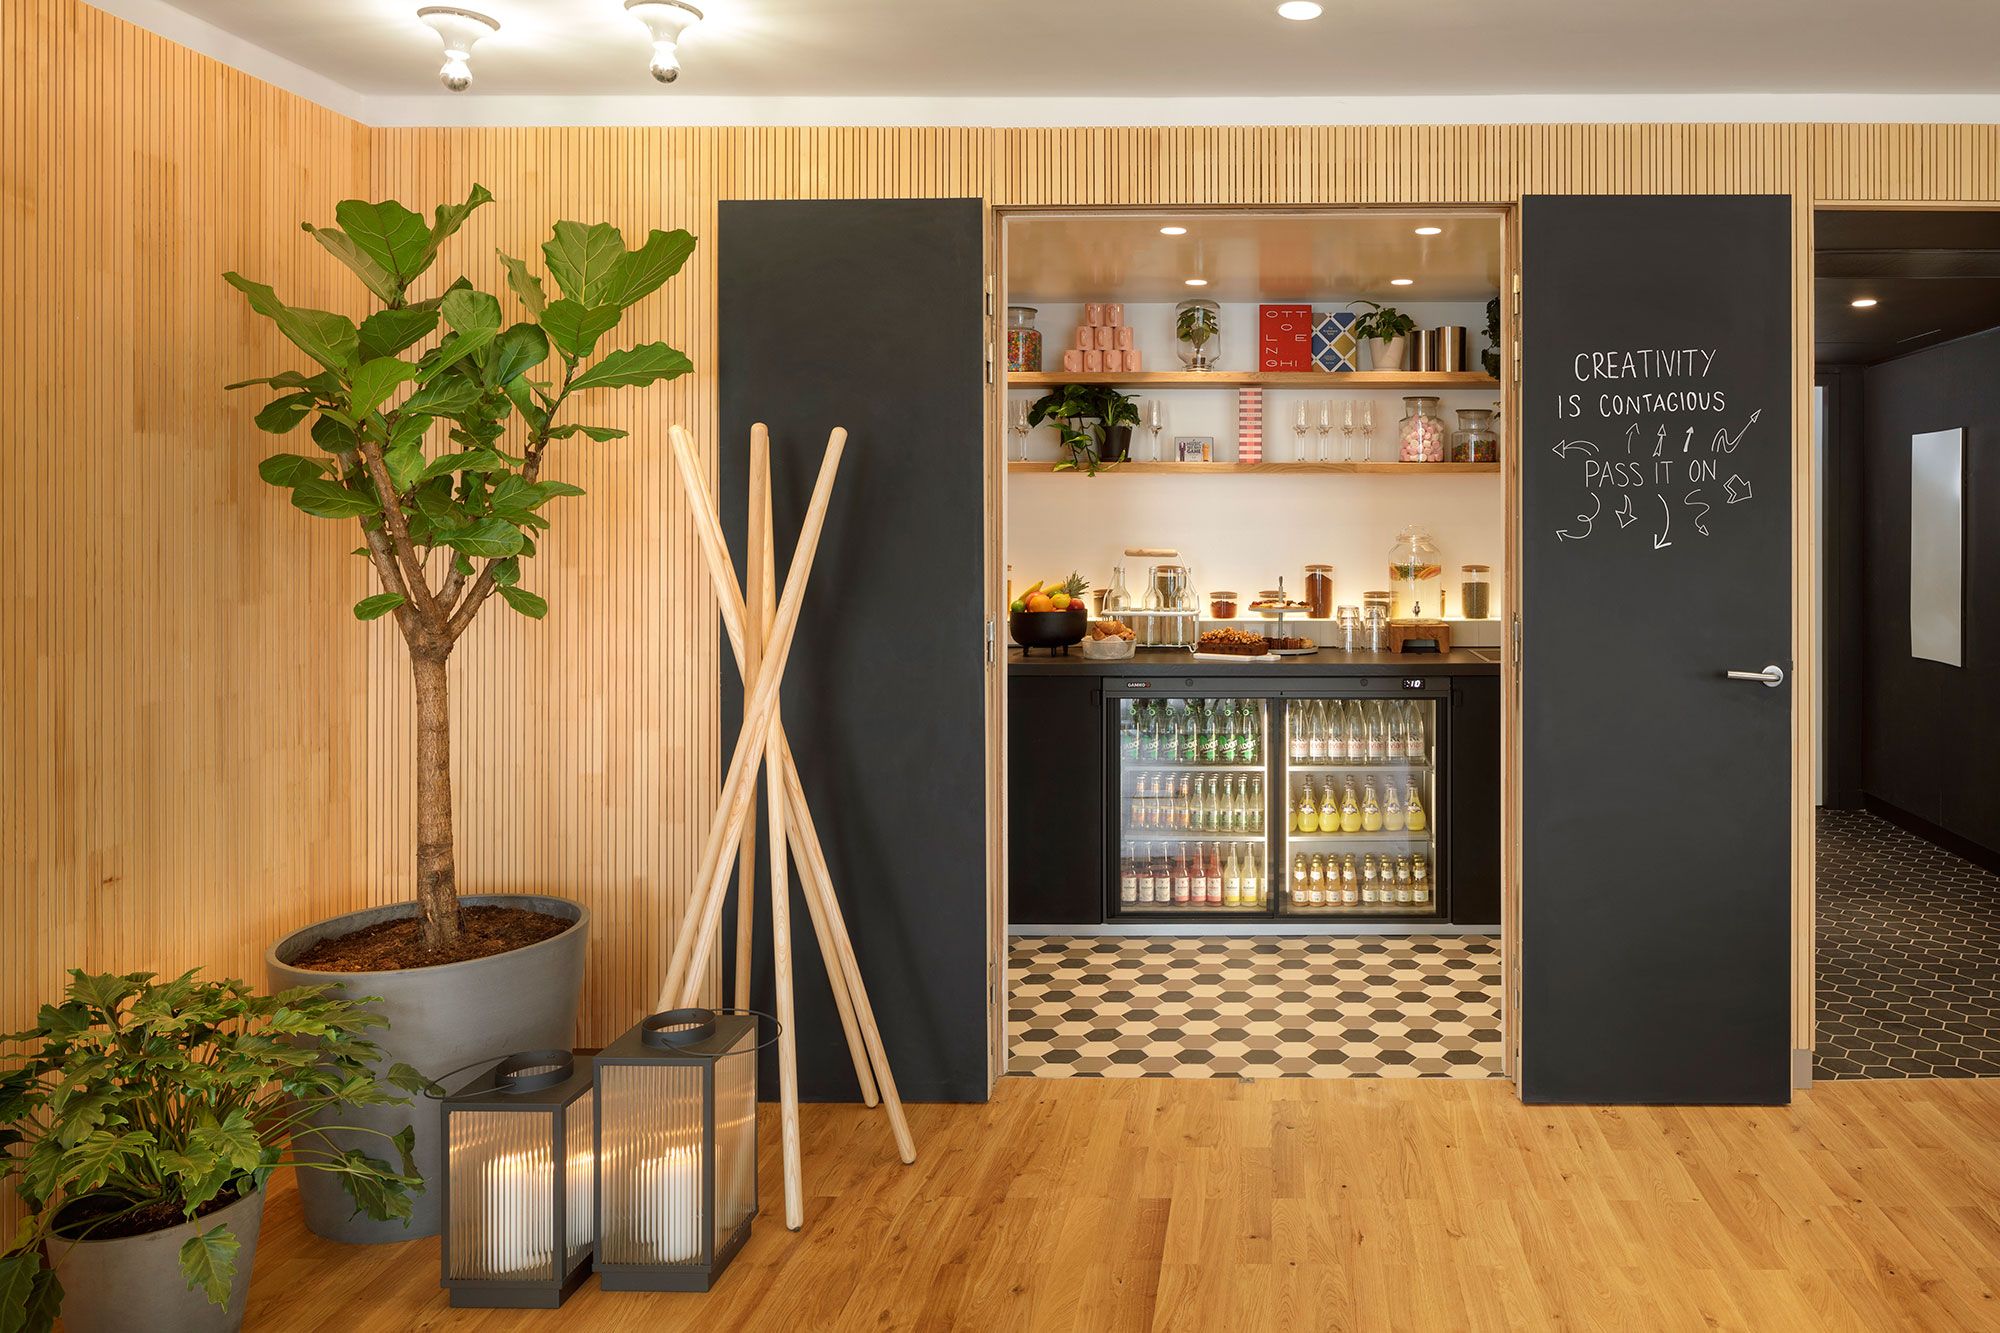 Hotel concepts for digital nomads - Zoku and the Graduate.